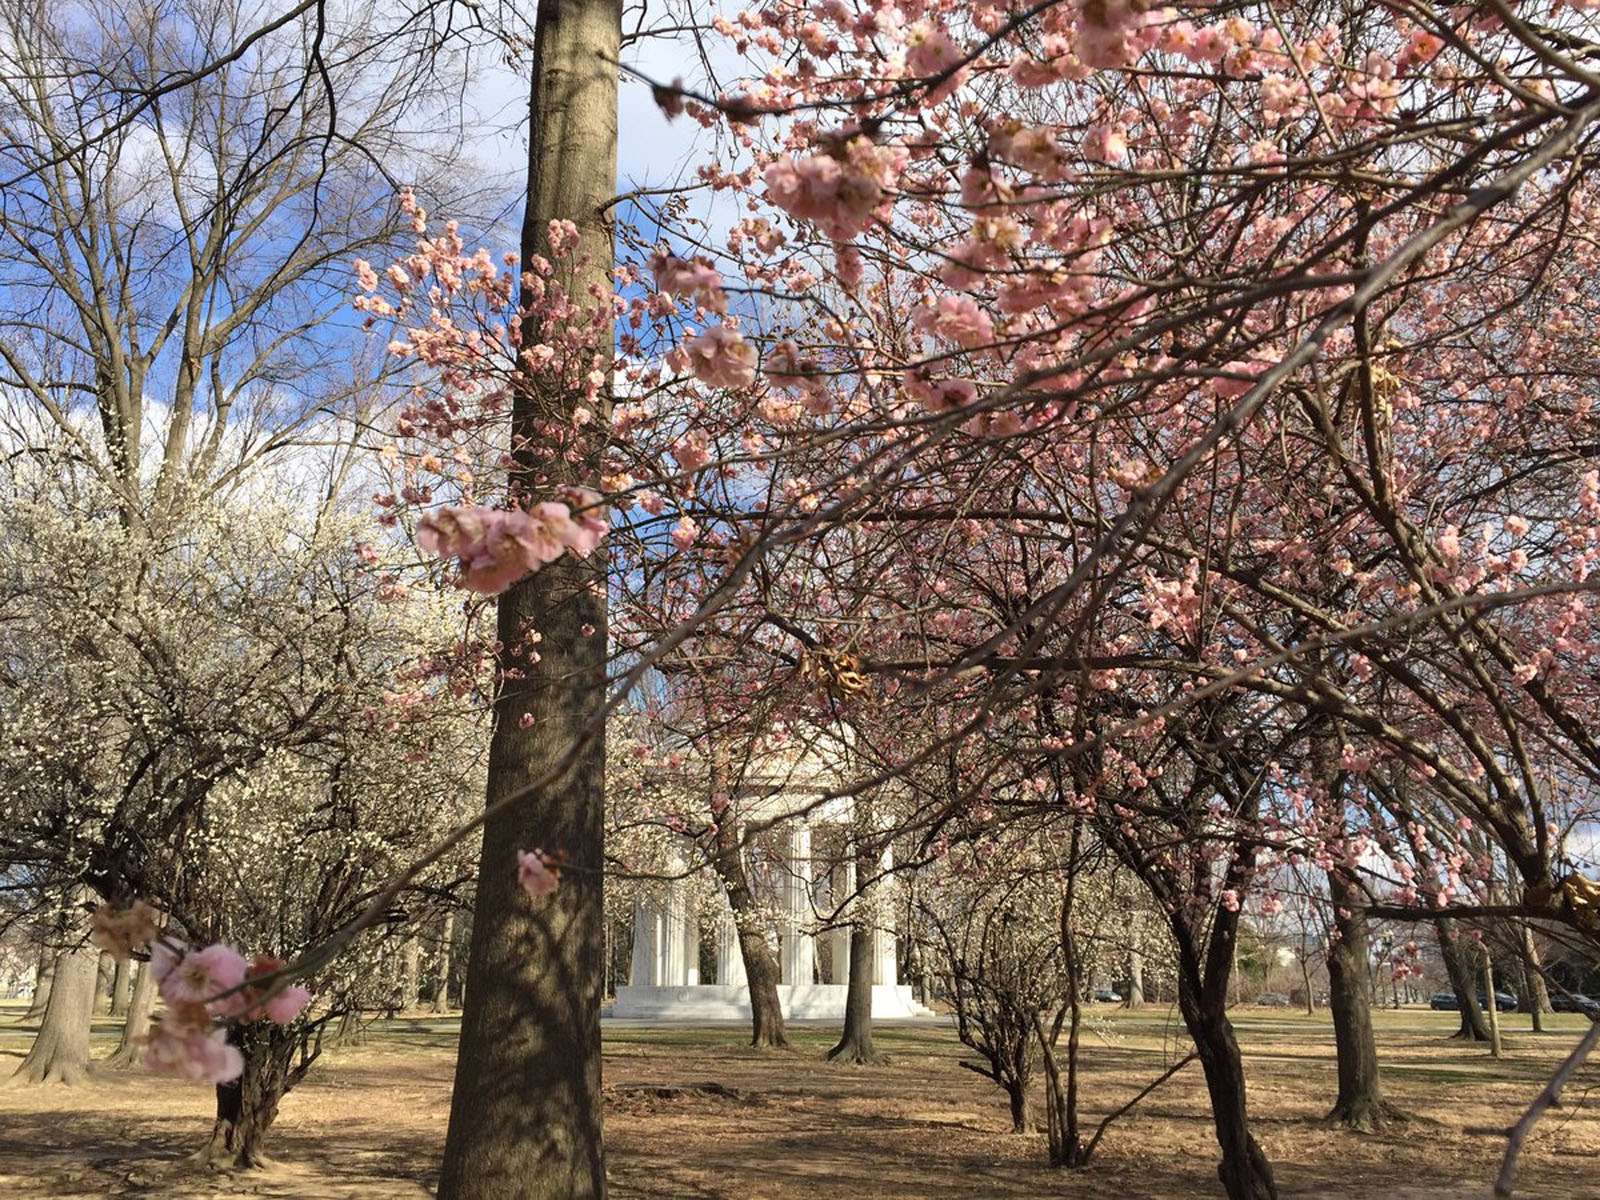 Don't be fooled by a bunch of trees with white and pink blossoms on them now near the D.C. War Memorial. According to the Park Service, those are flowering apricot trees, which are typically the first trees to bloom on the National Mall every year. (WTOP/Michelle Basch)